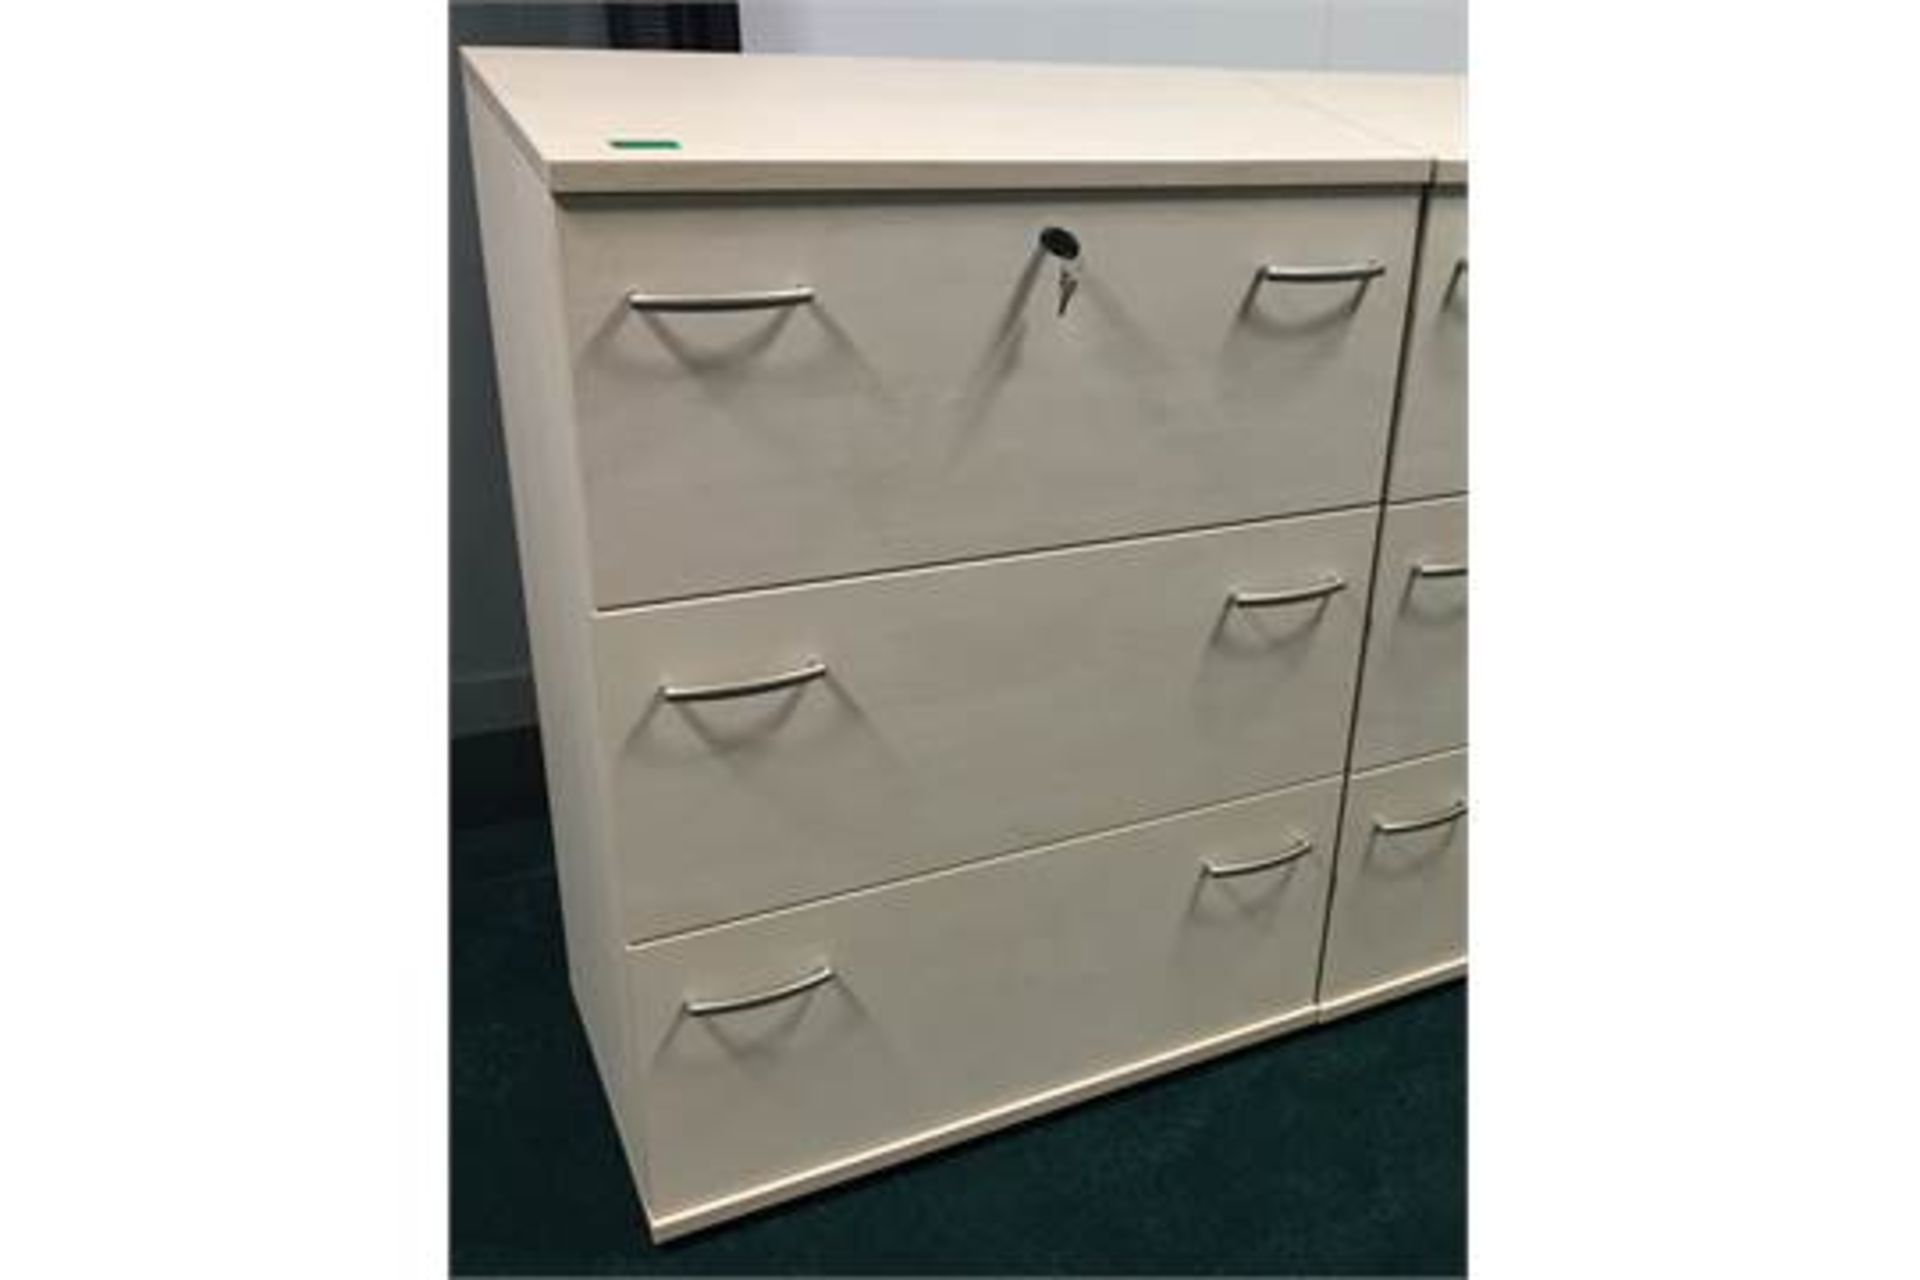 1 x Modern Three Drawer Office Filing Cabinet - Light Maple Finish - Includes Lock and Key - Premium - Image 3 of 4